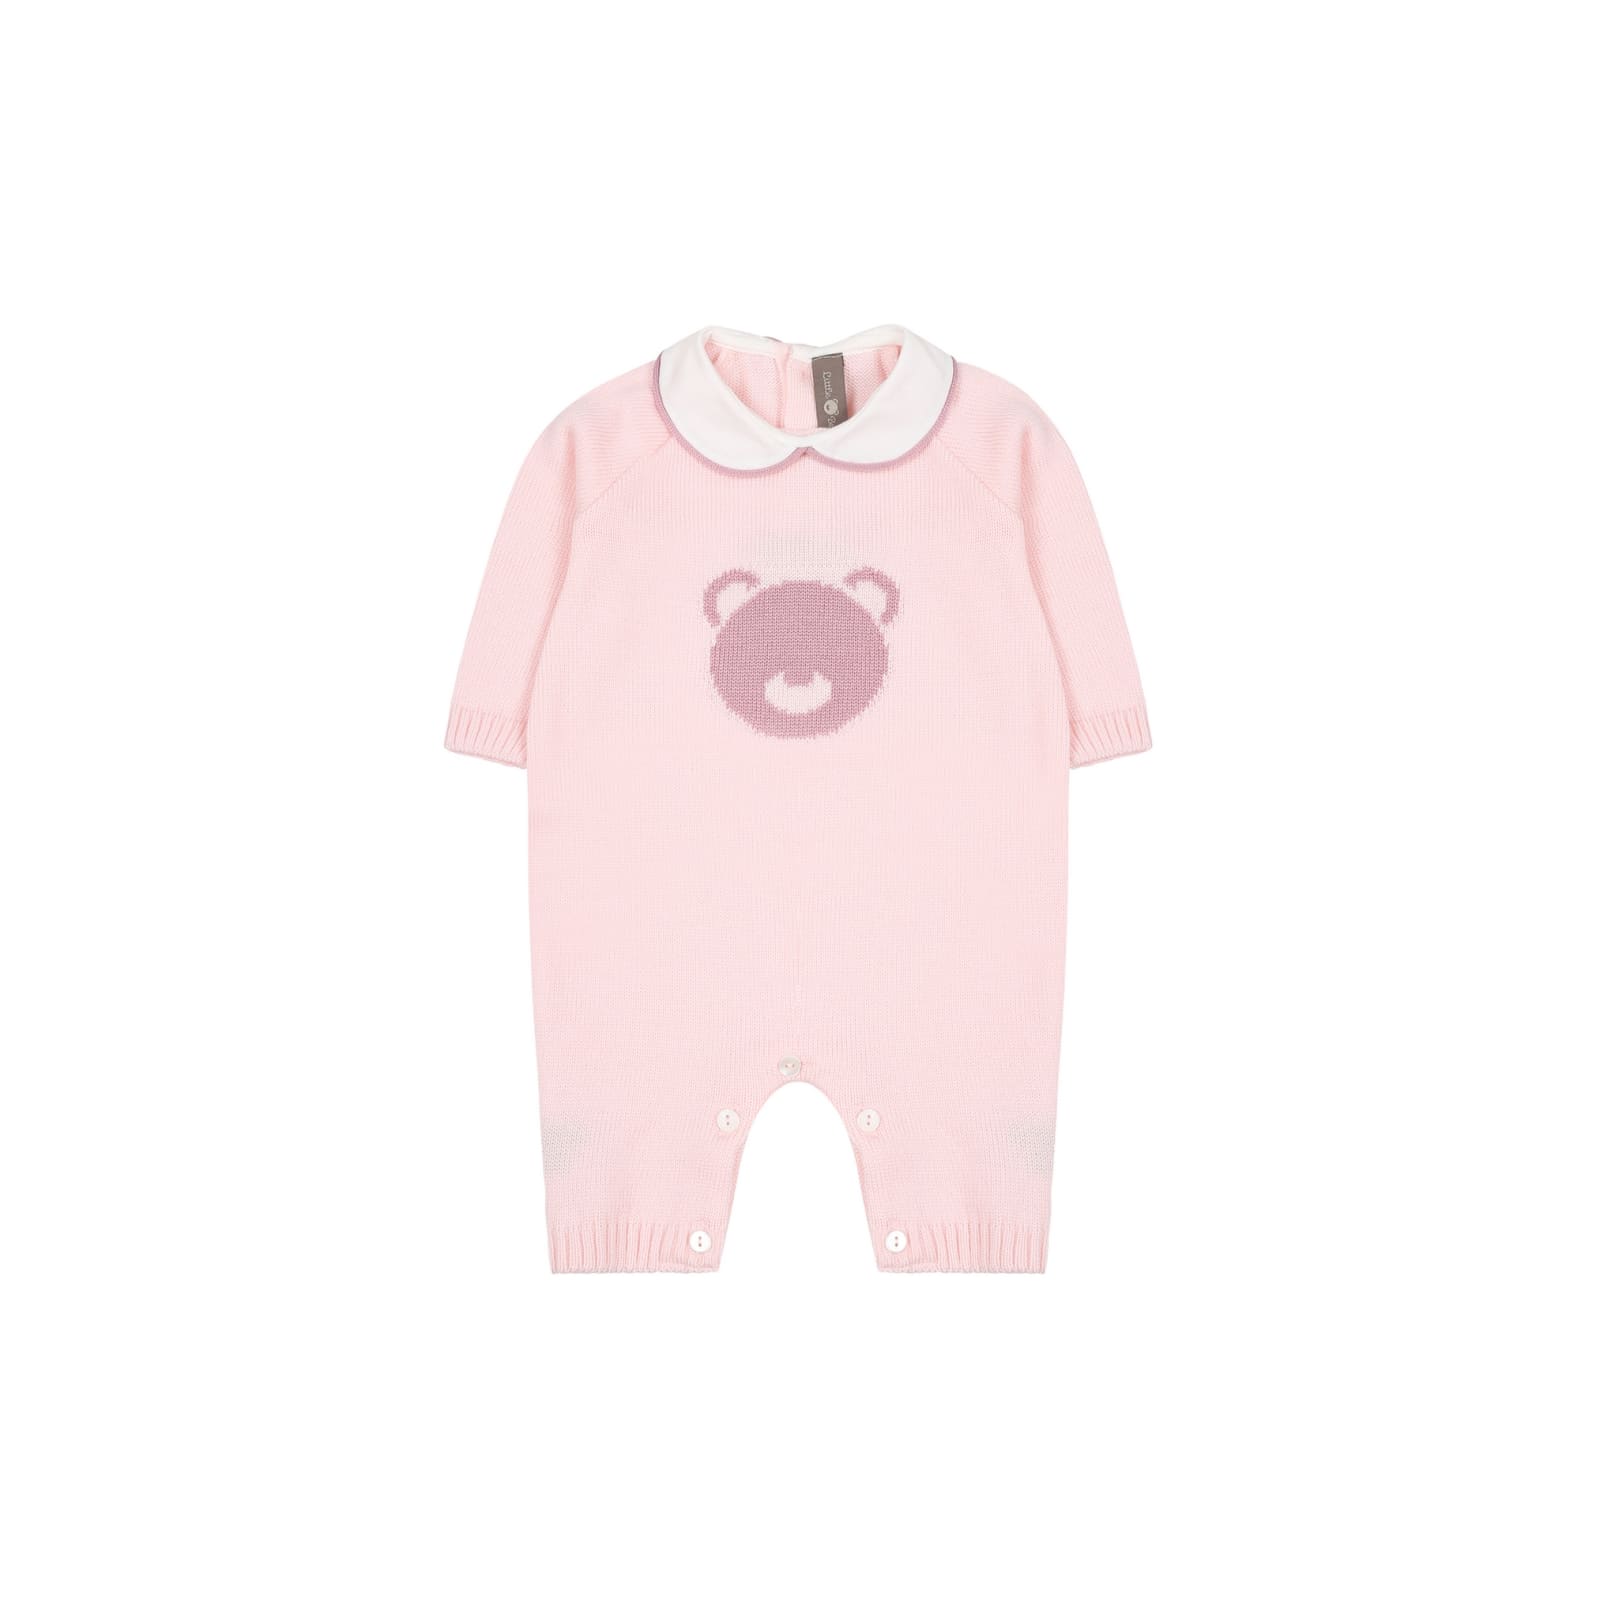 LITTLE BEAR PINK BABYGROWN FOR BABY GIRL WITH EMBROIDERED BEAR